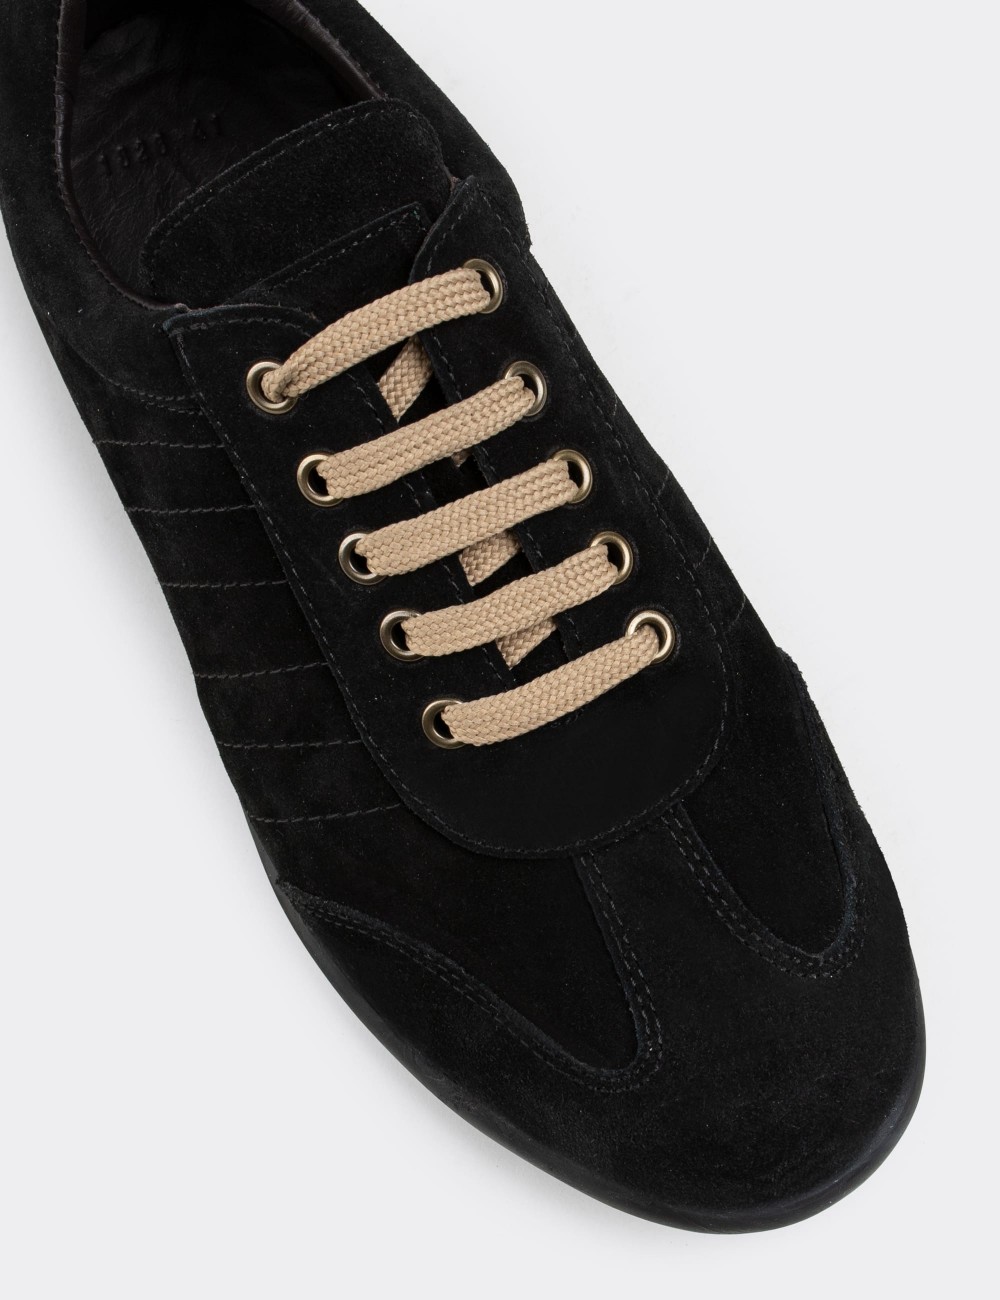 Black Suede Leather Lace-up Shoes - 01826MSYHC02